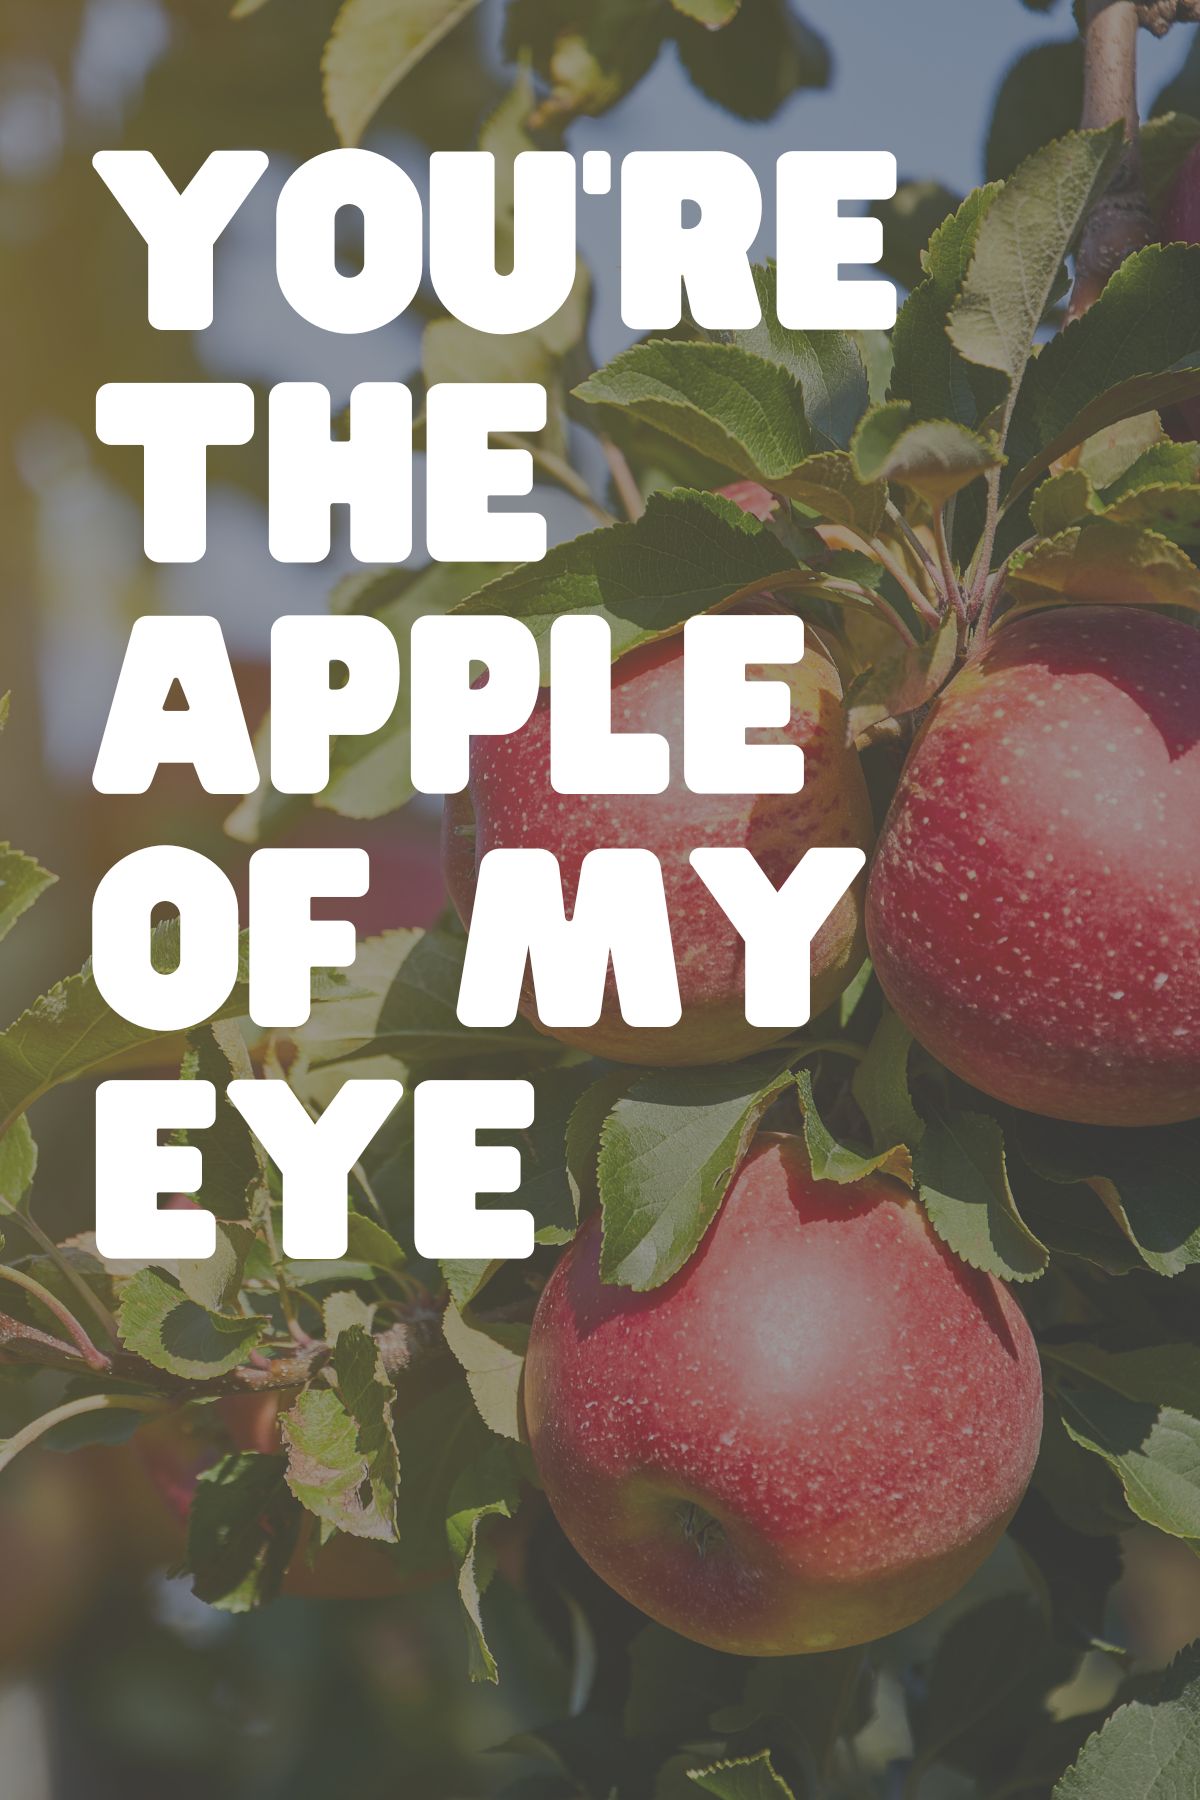 apple saying "You are the apple of my eye"